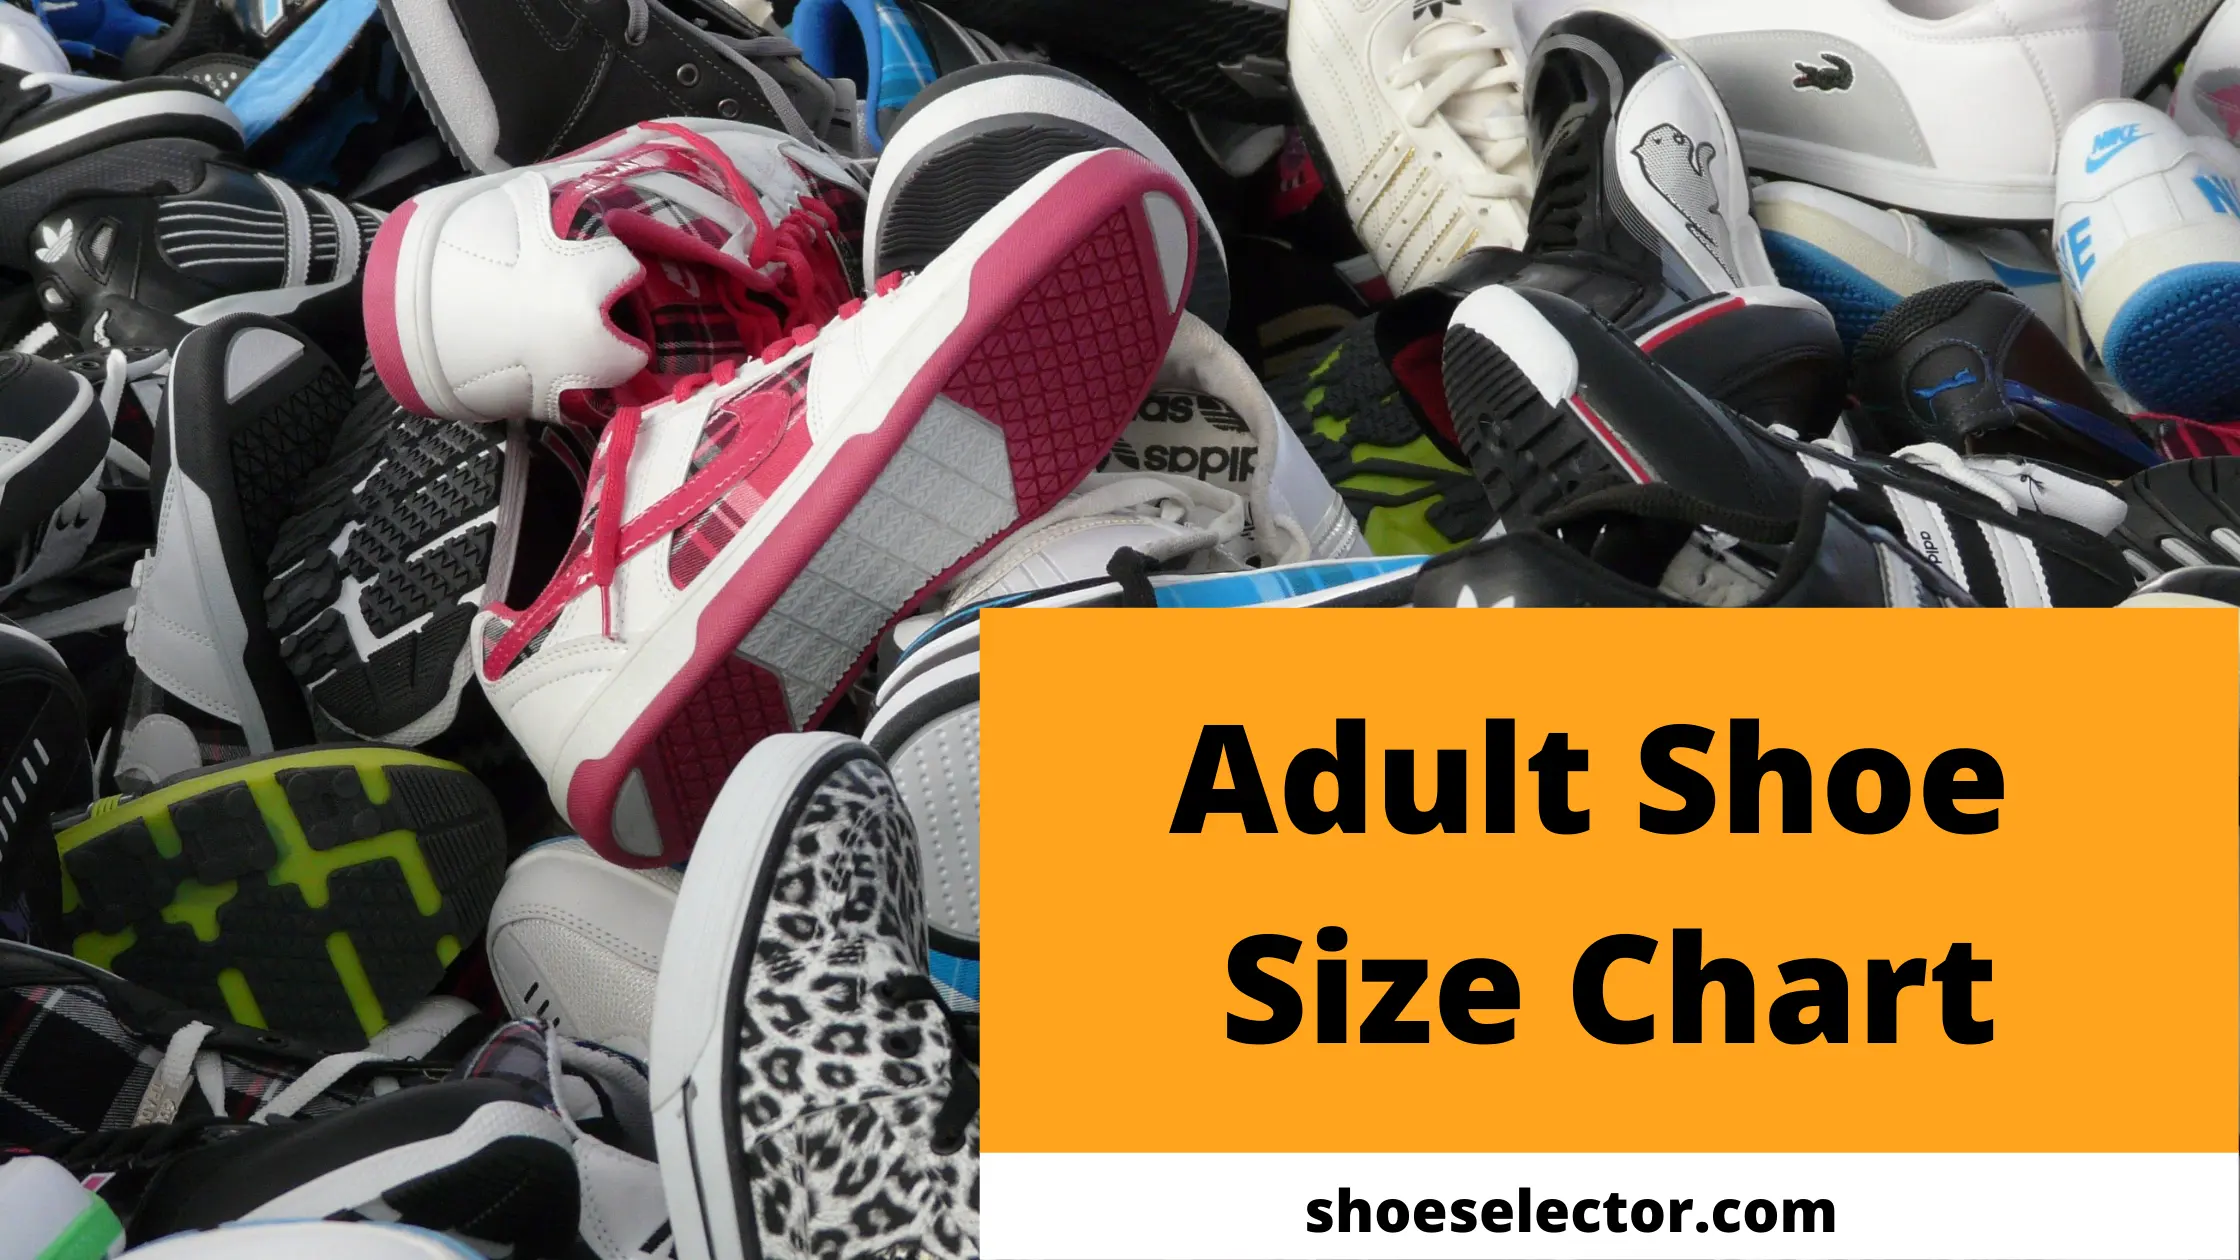 Adult Shoe Size Chart And Conversations